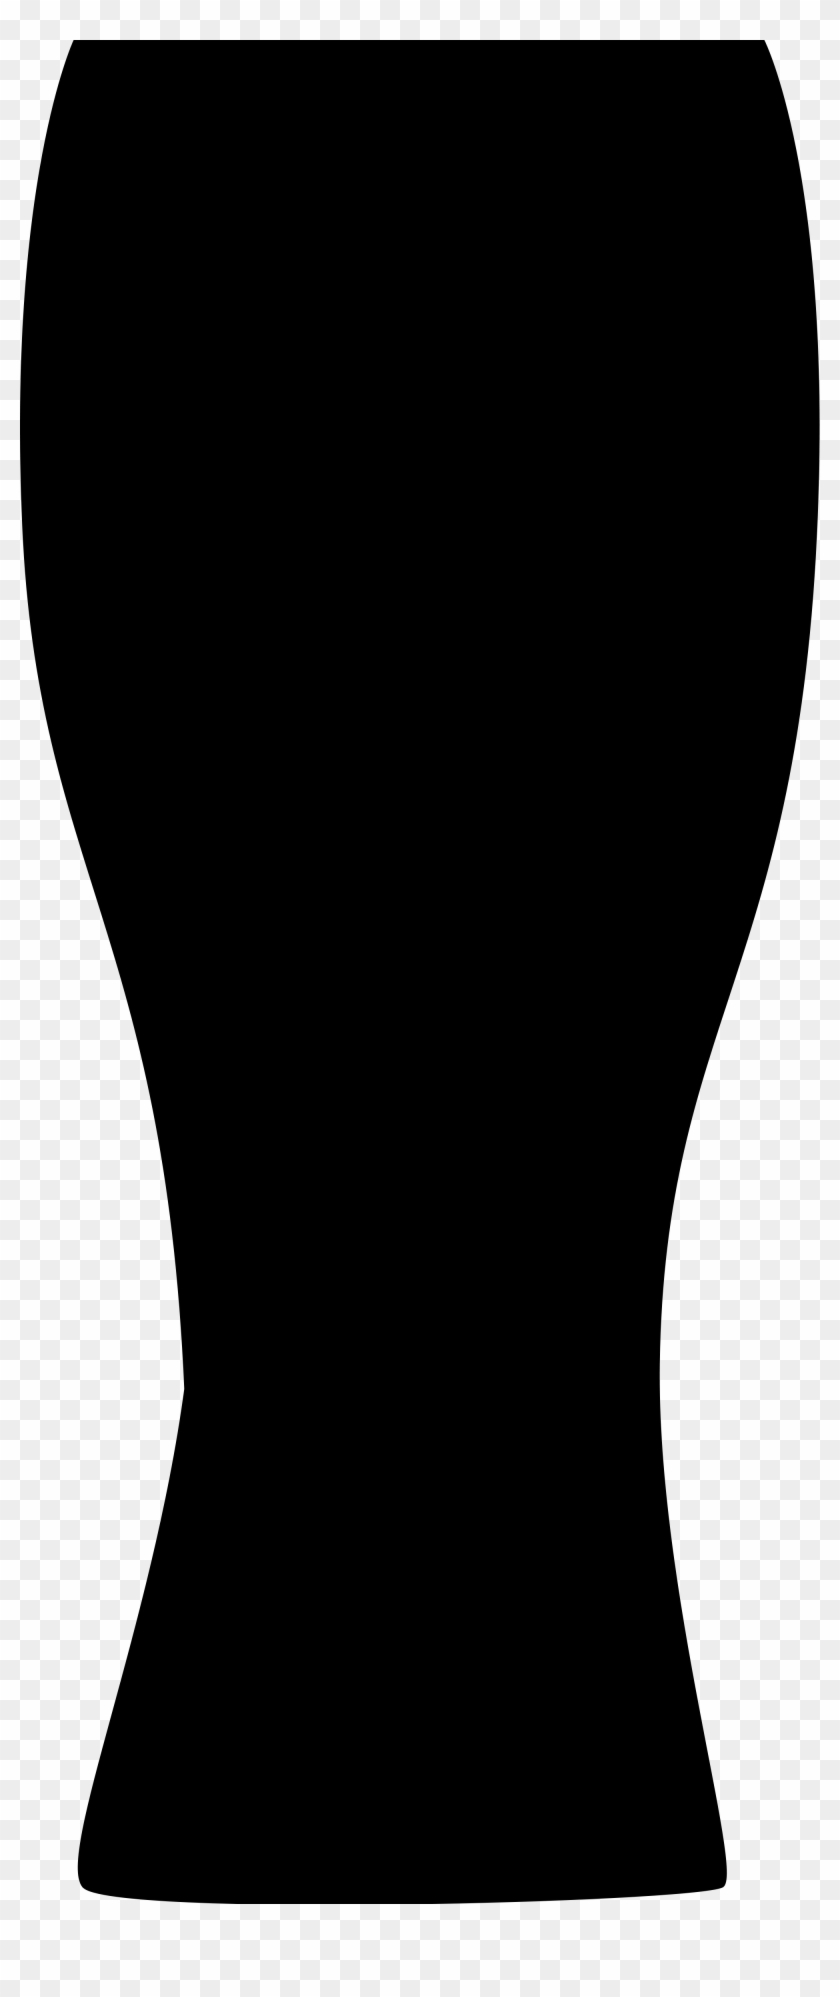 2000 X 4660 7 - Pint Glass Silhouette Vector, HD Png Download ...